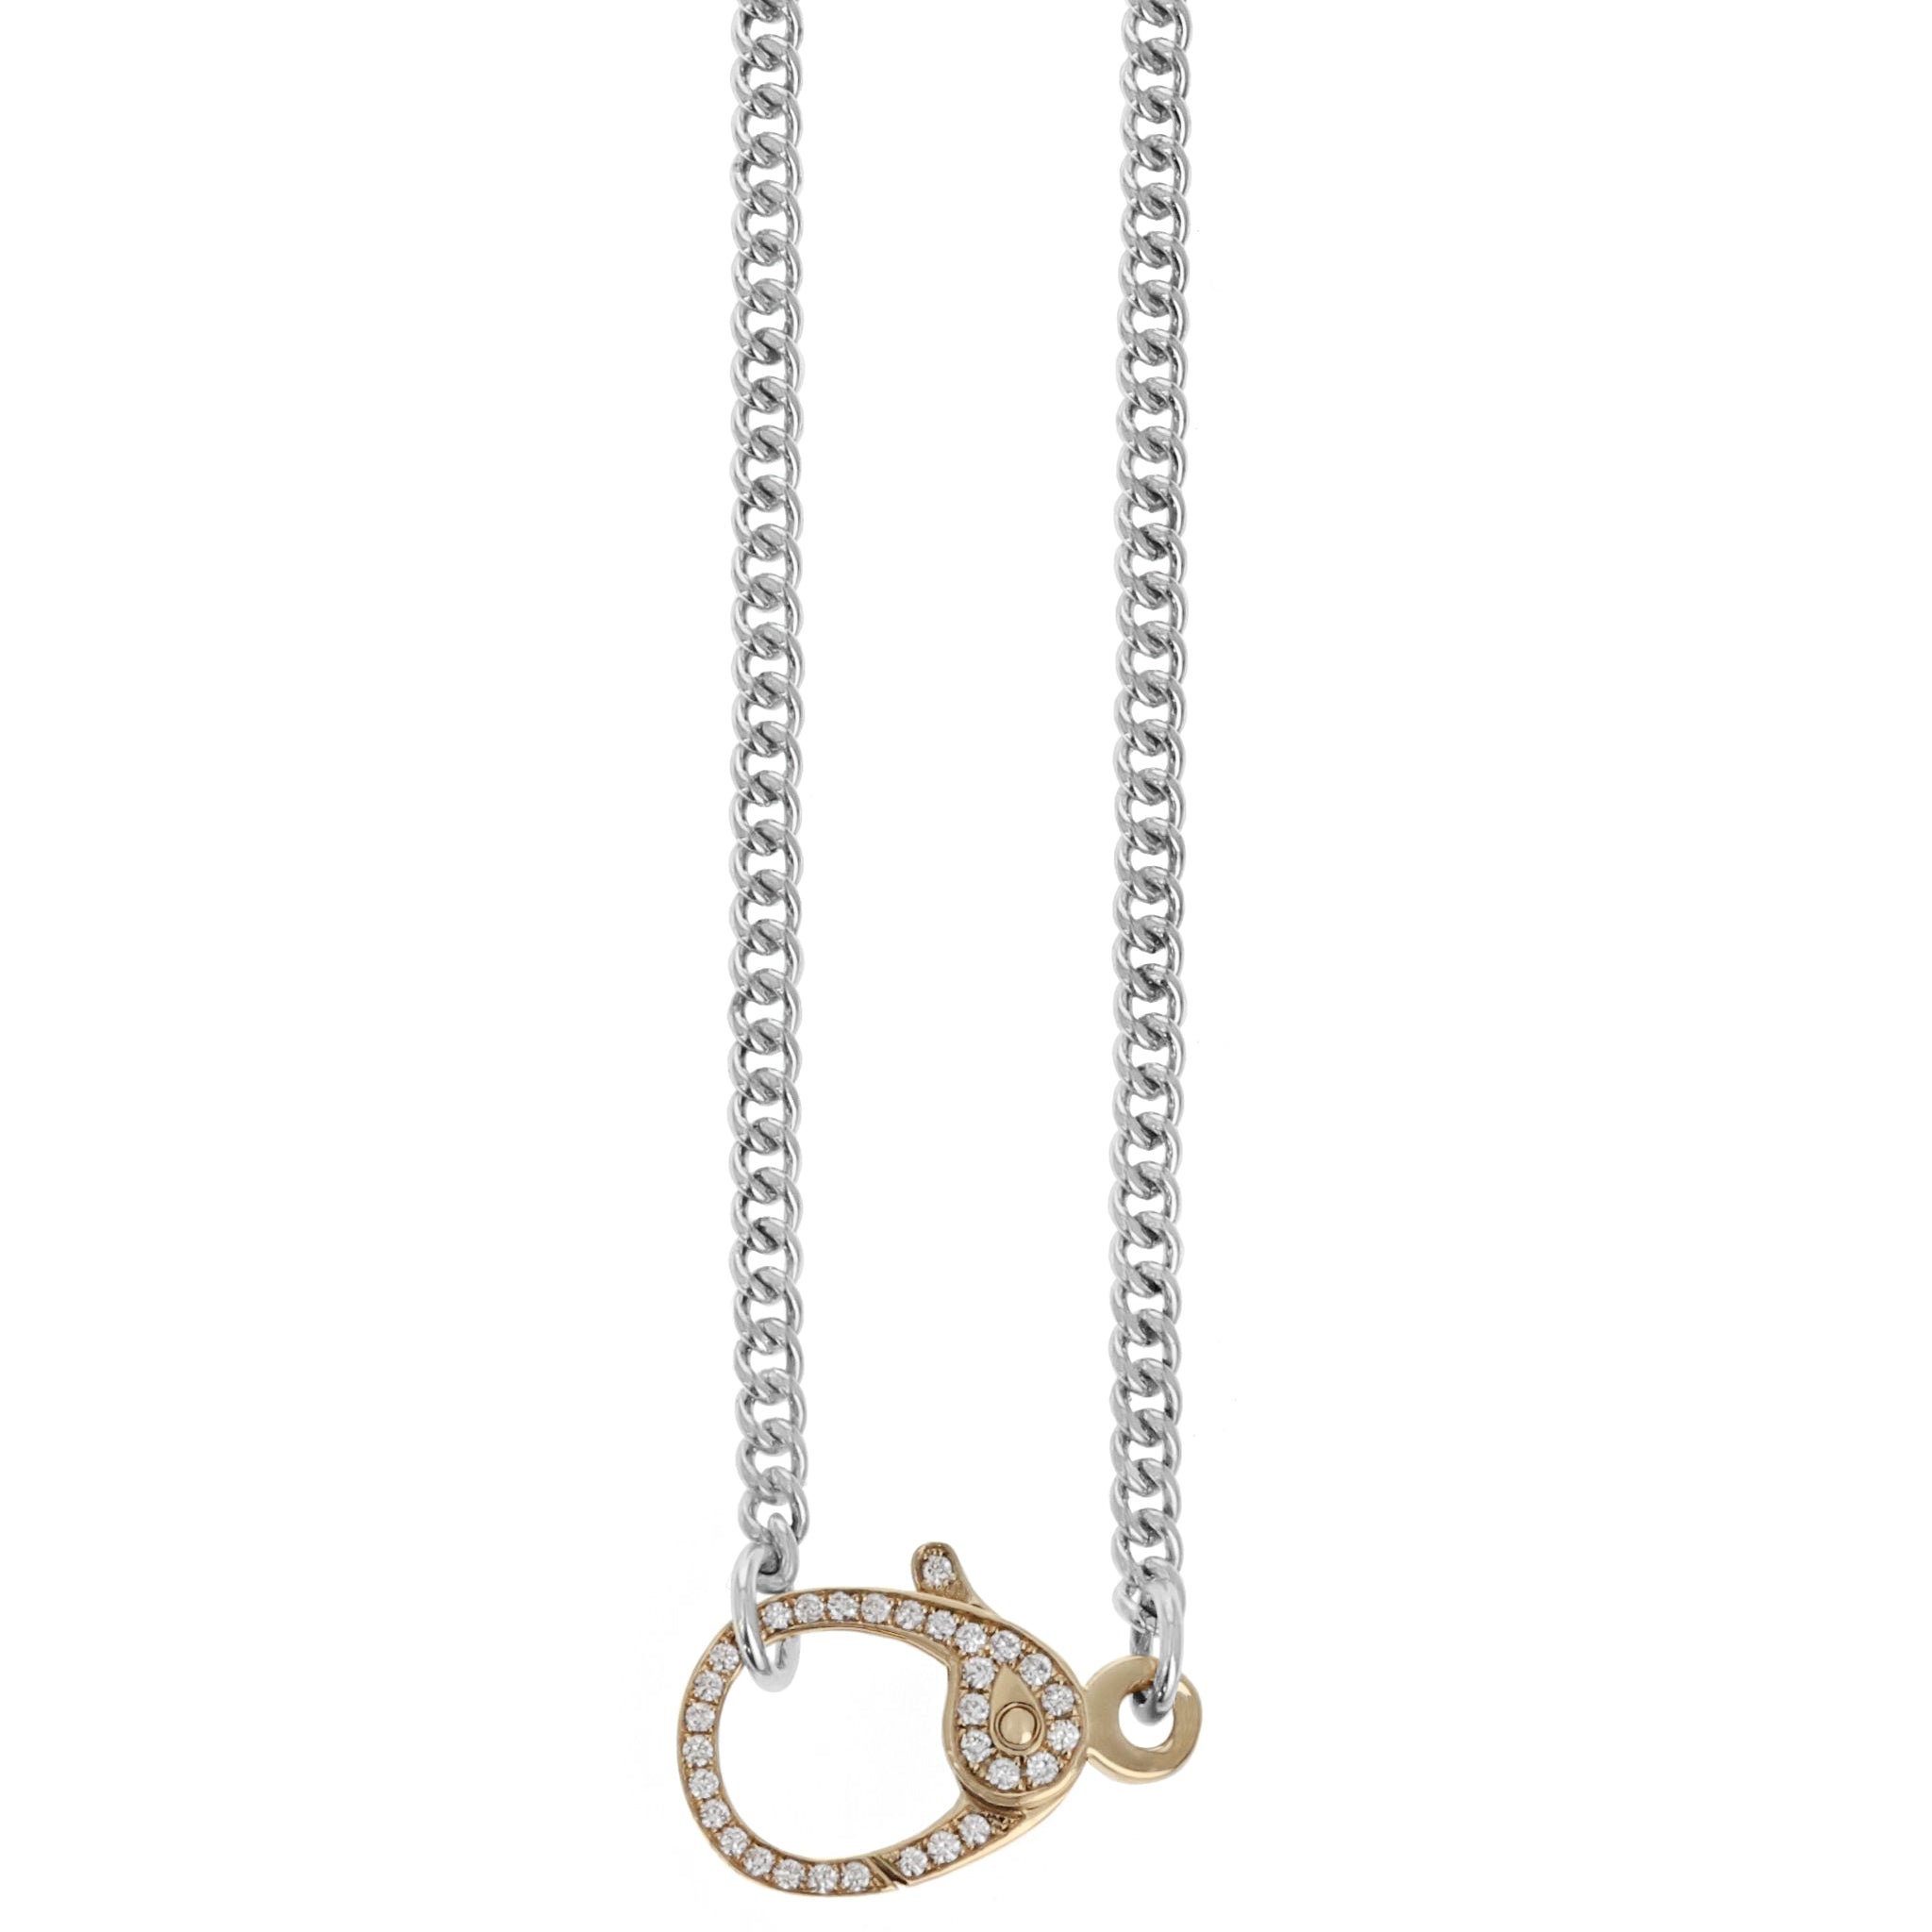 Fine Curb Chain with Small 10K Gold and Pave Diamond Lobster Clasp